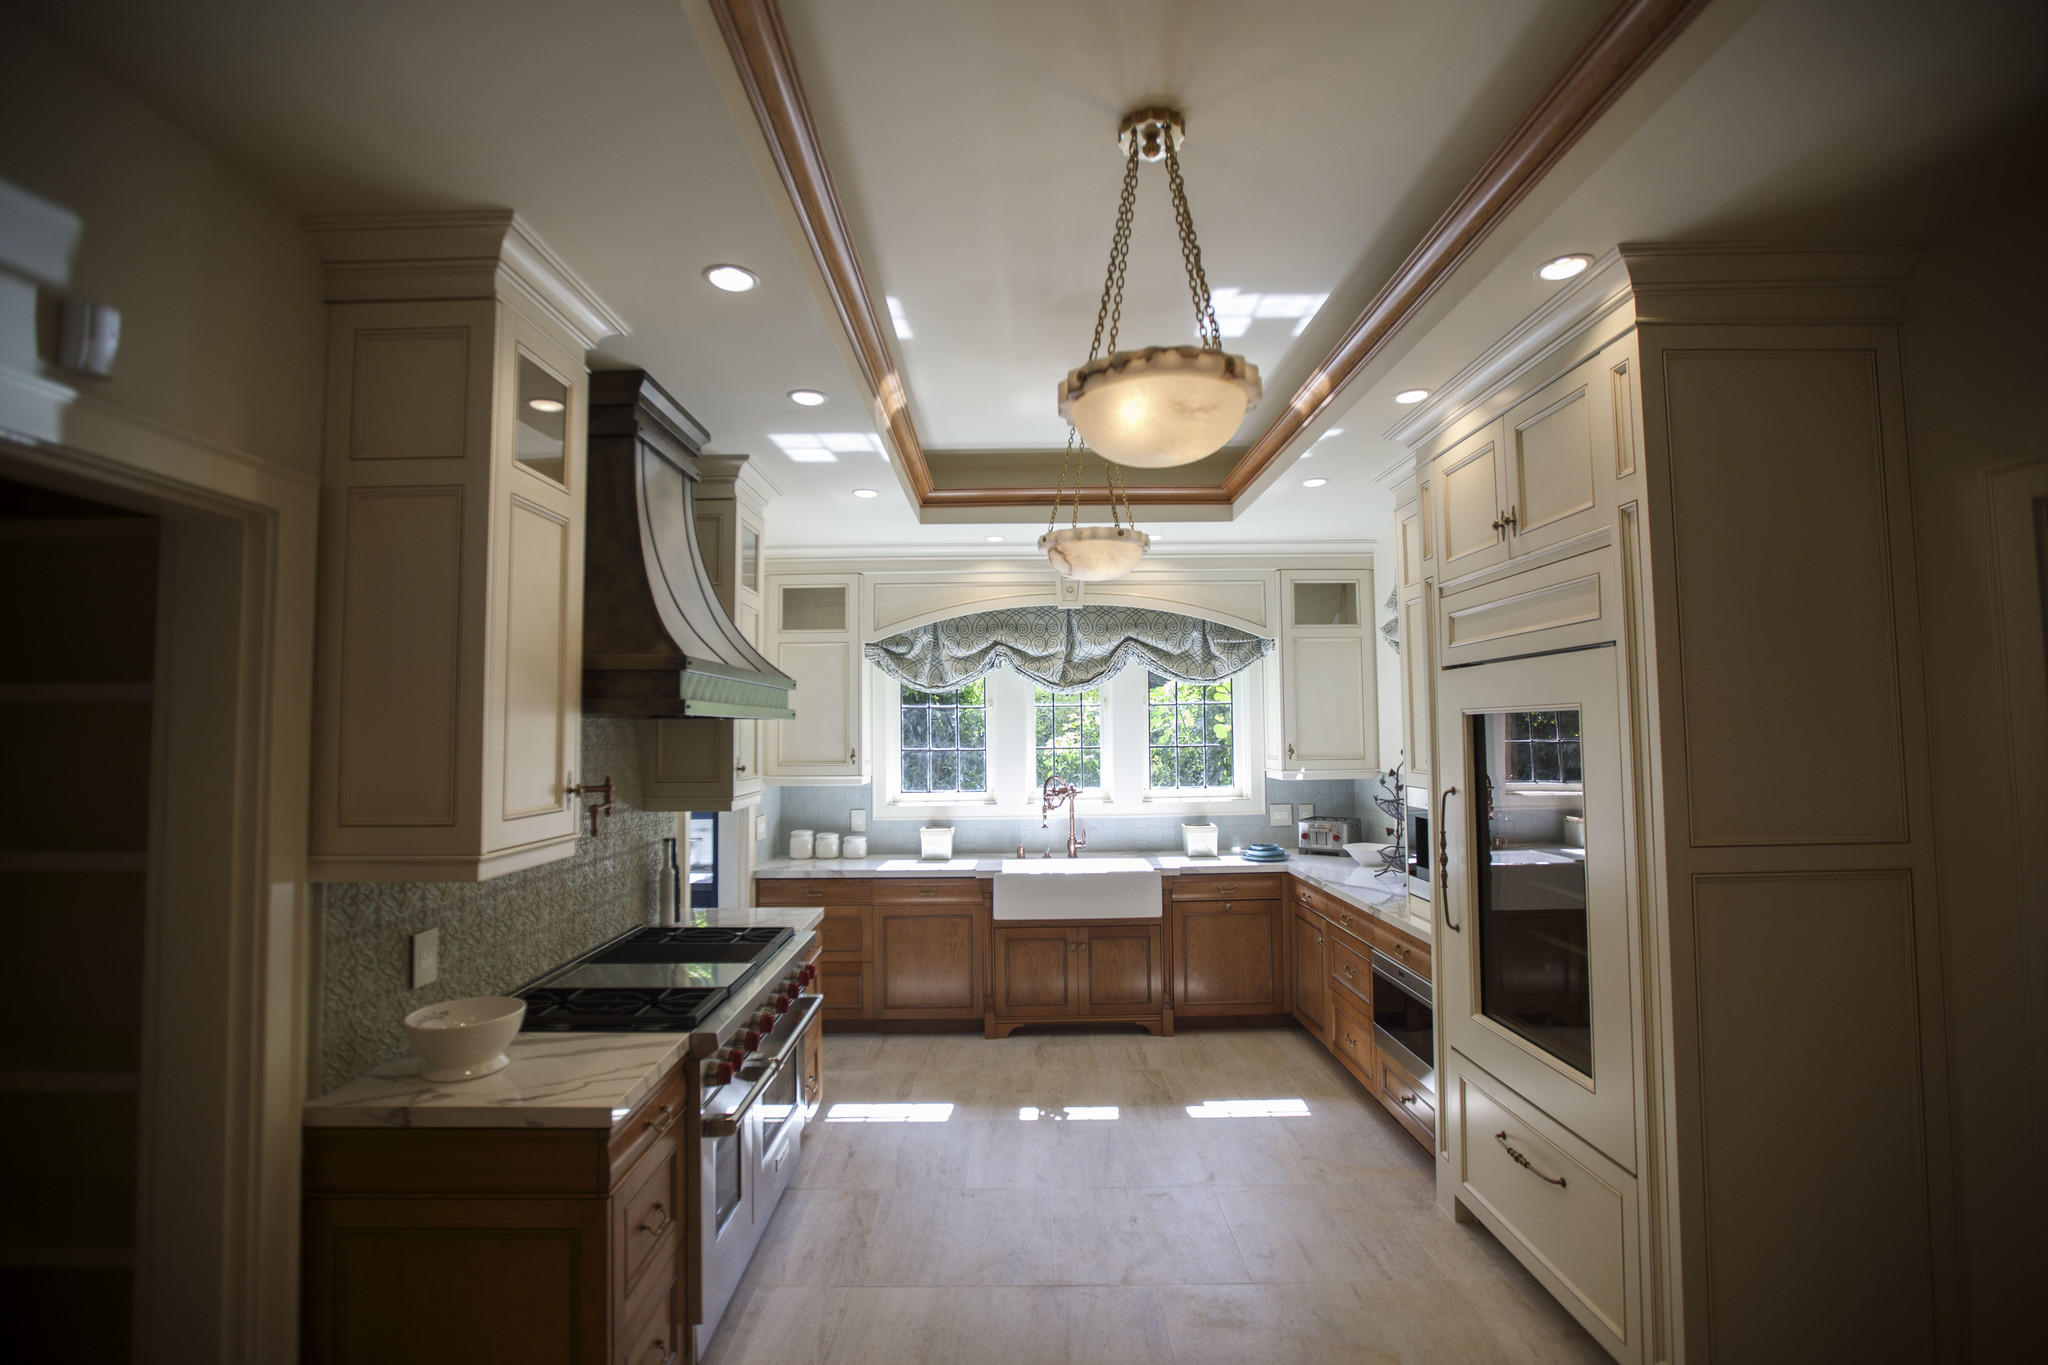 The kitchen by D Christjan Fine Cabinetry Design & Manufacturing, after renovations.